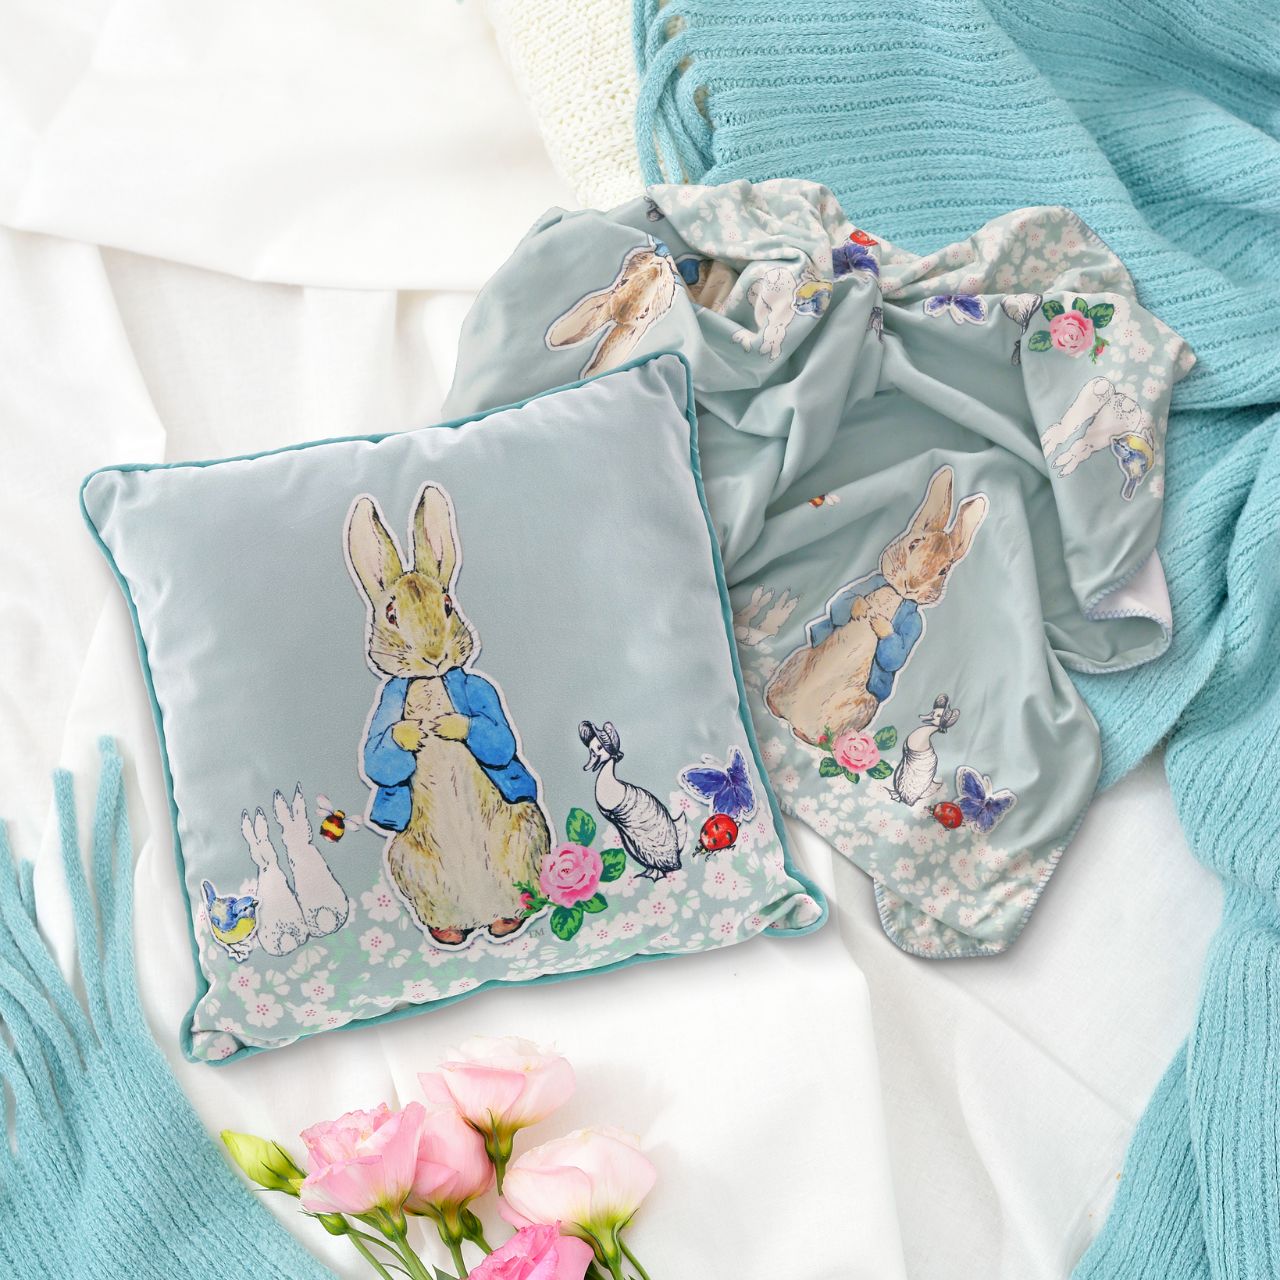 Beatrix Potter Peter Rabbit Pin Up Throw  Following on from our Best-Selling Peter Rabbit Adult Accessories Collection, we have created this beautiful Peter Rabbit Pin Up Throw. This throw has been finished in a super-soft and snuggly fabric and will make the perfect edition to your favourite room. 